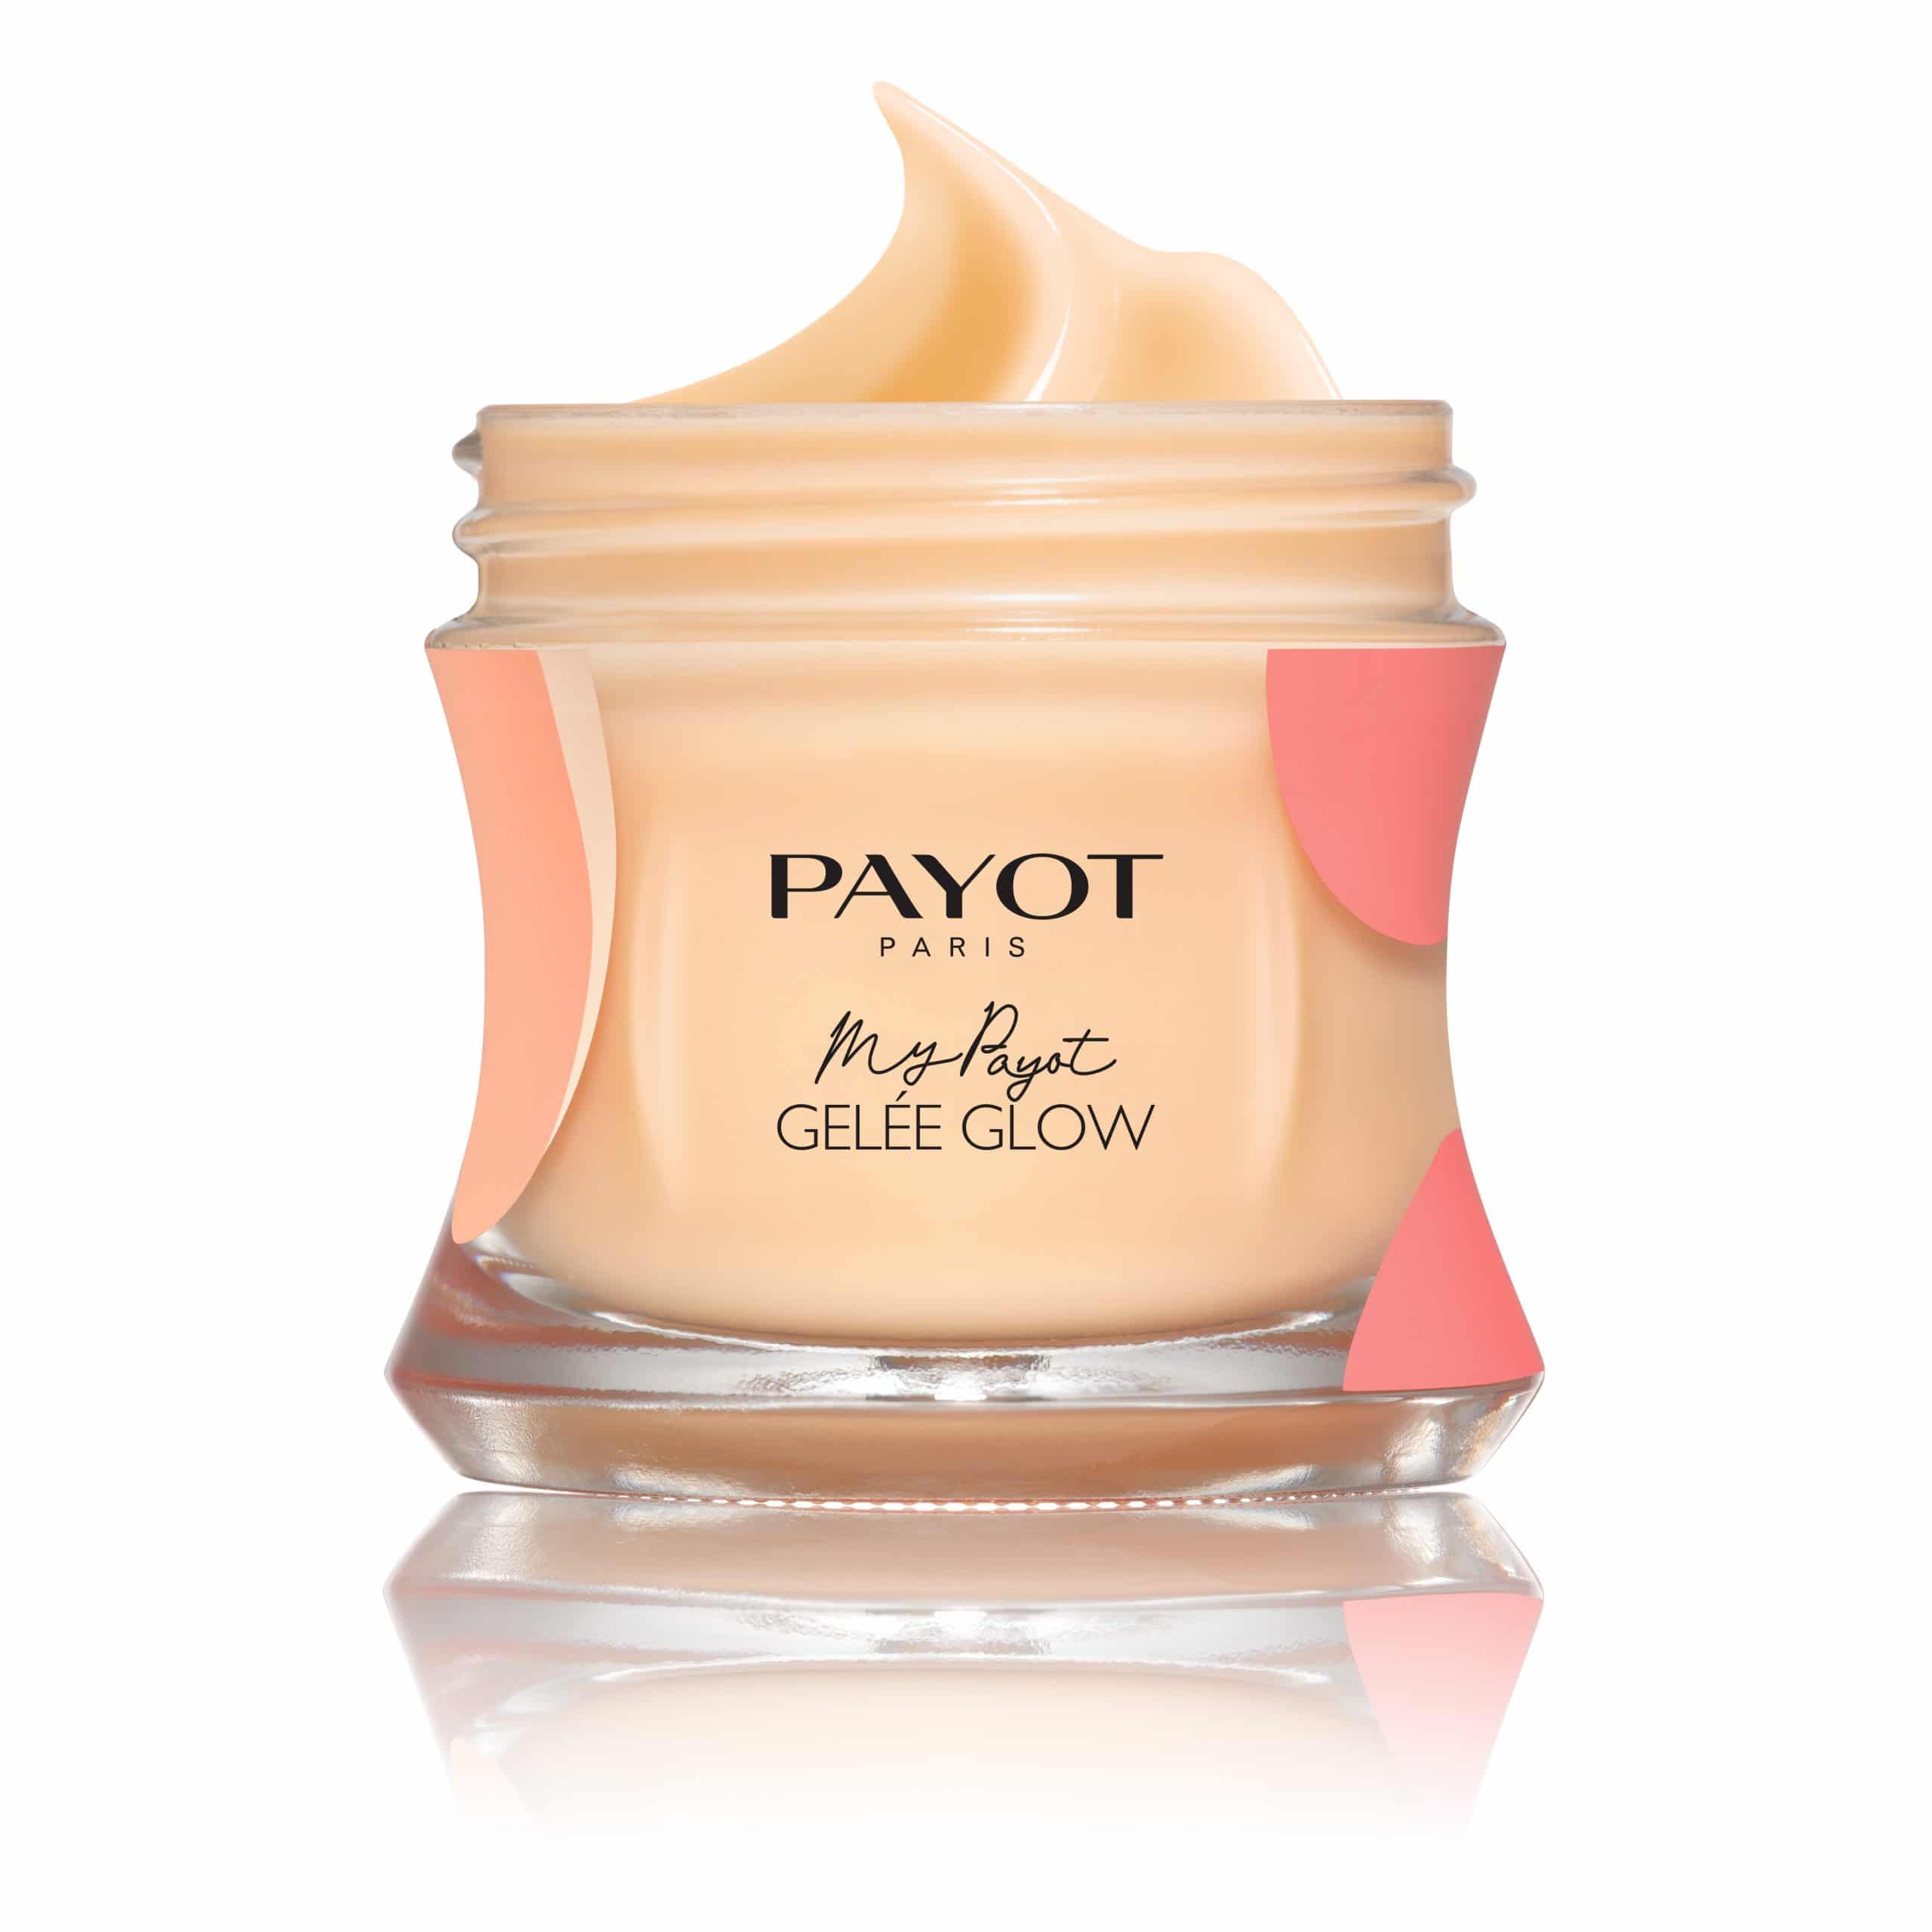 My Payot Gelee Glow